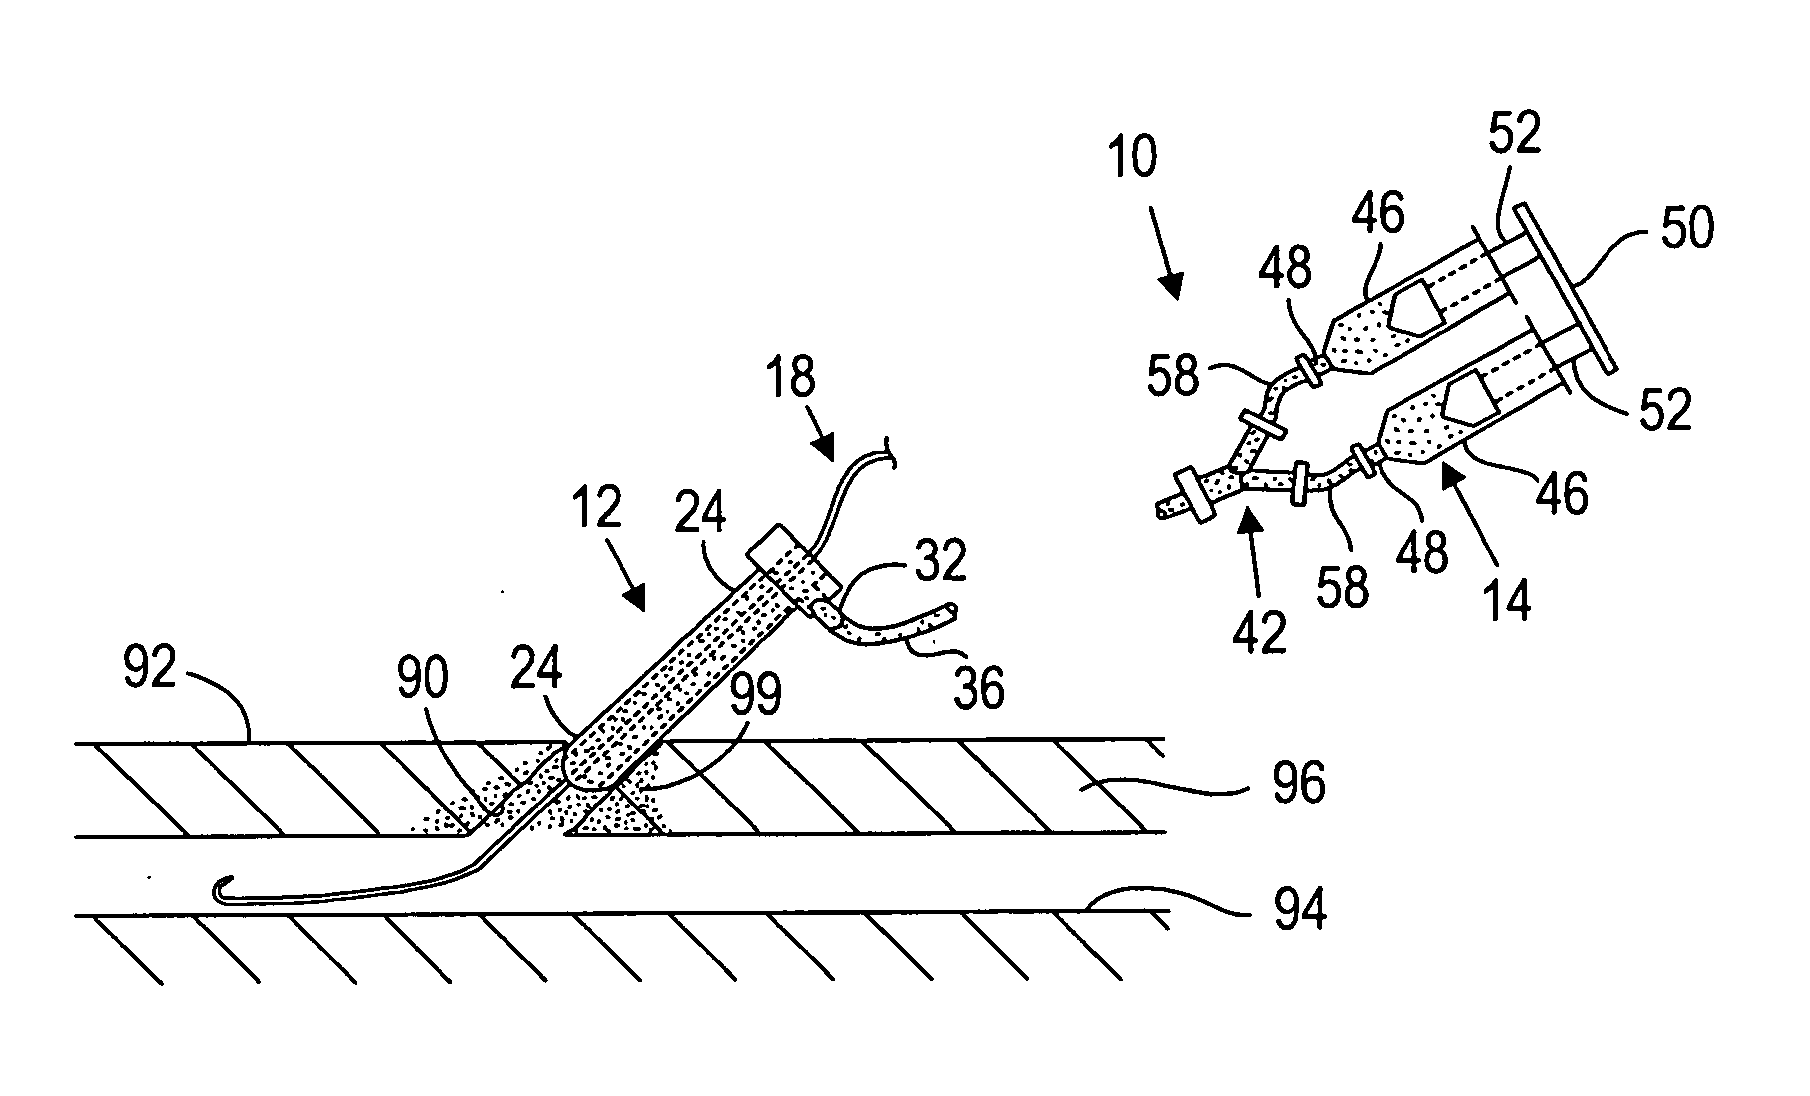 Apparatus and methods for delivering sealing materials during a percutaneous procedure to facilitate hemostasis